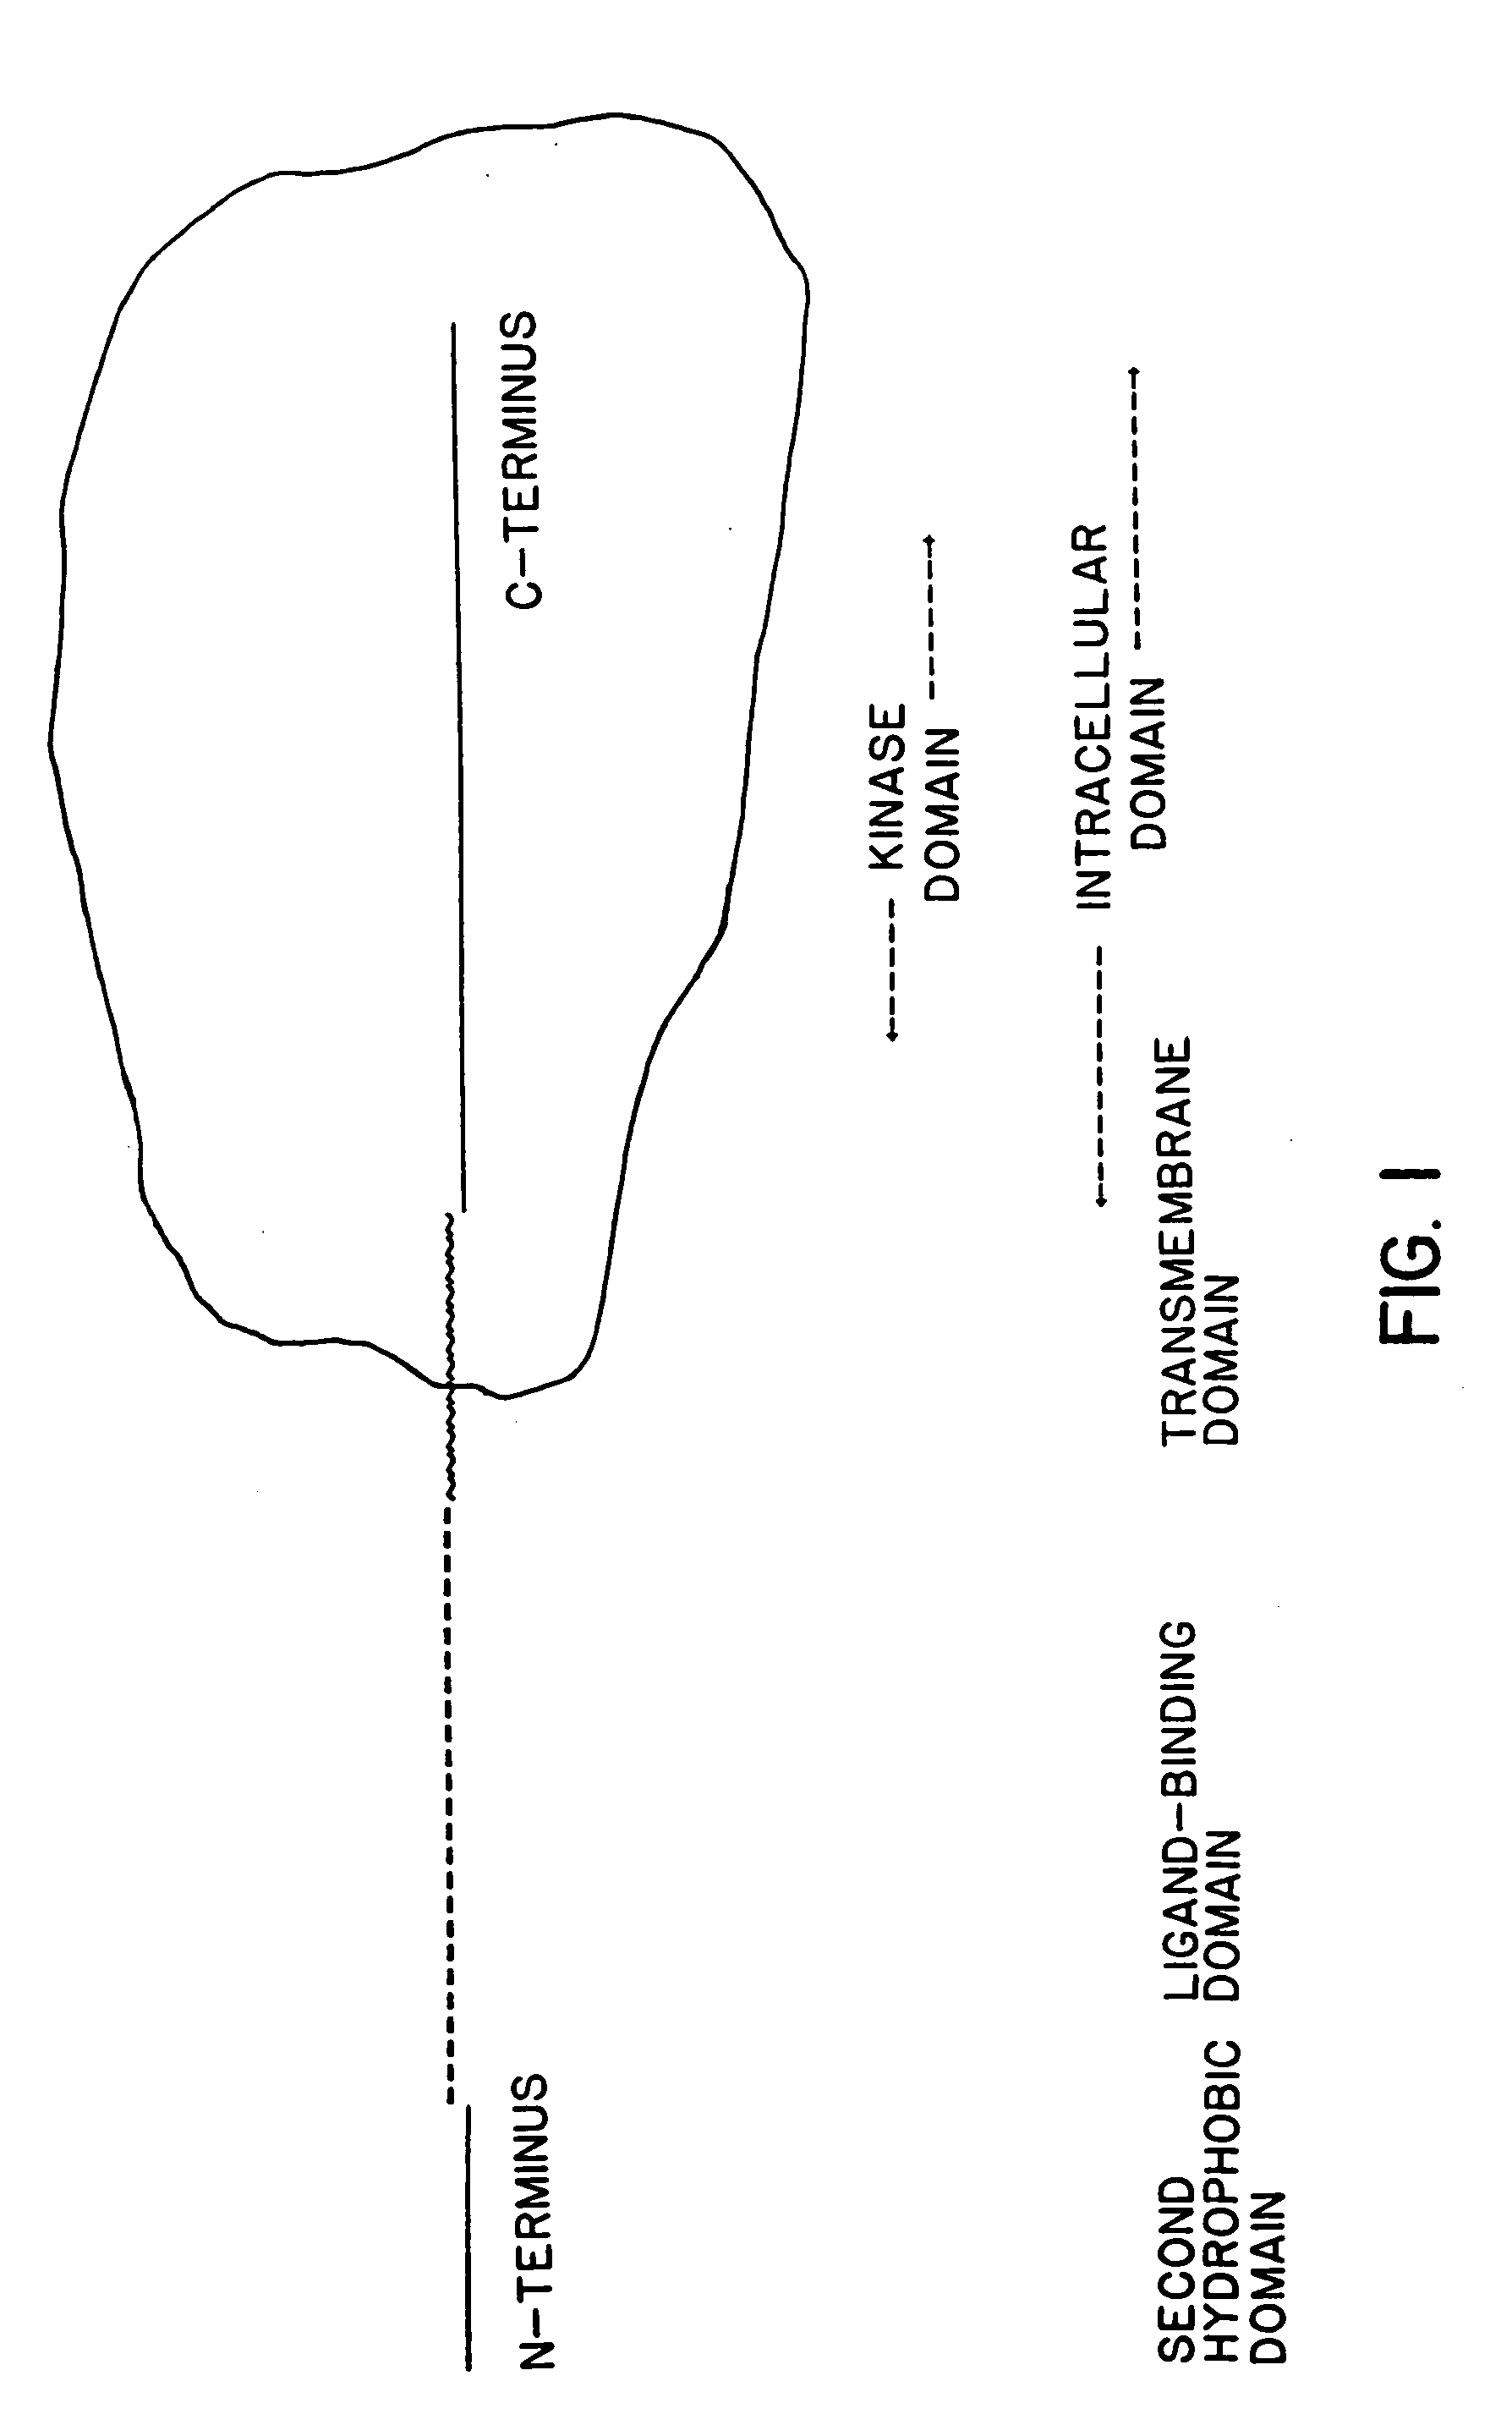 Cloning and recombinant production of CRF receptor(s)